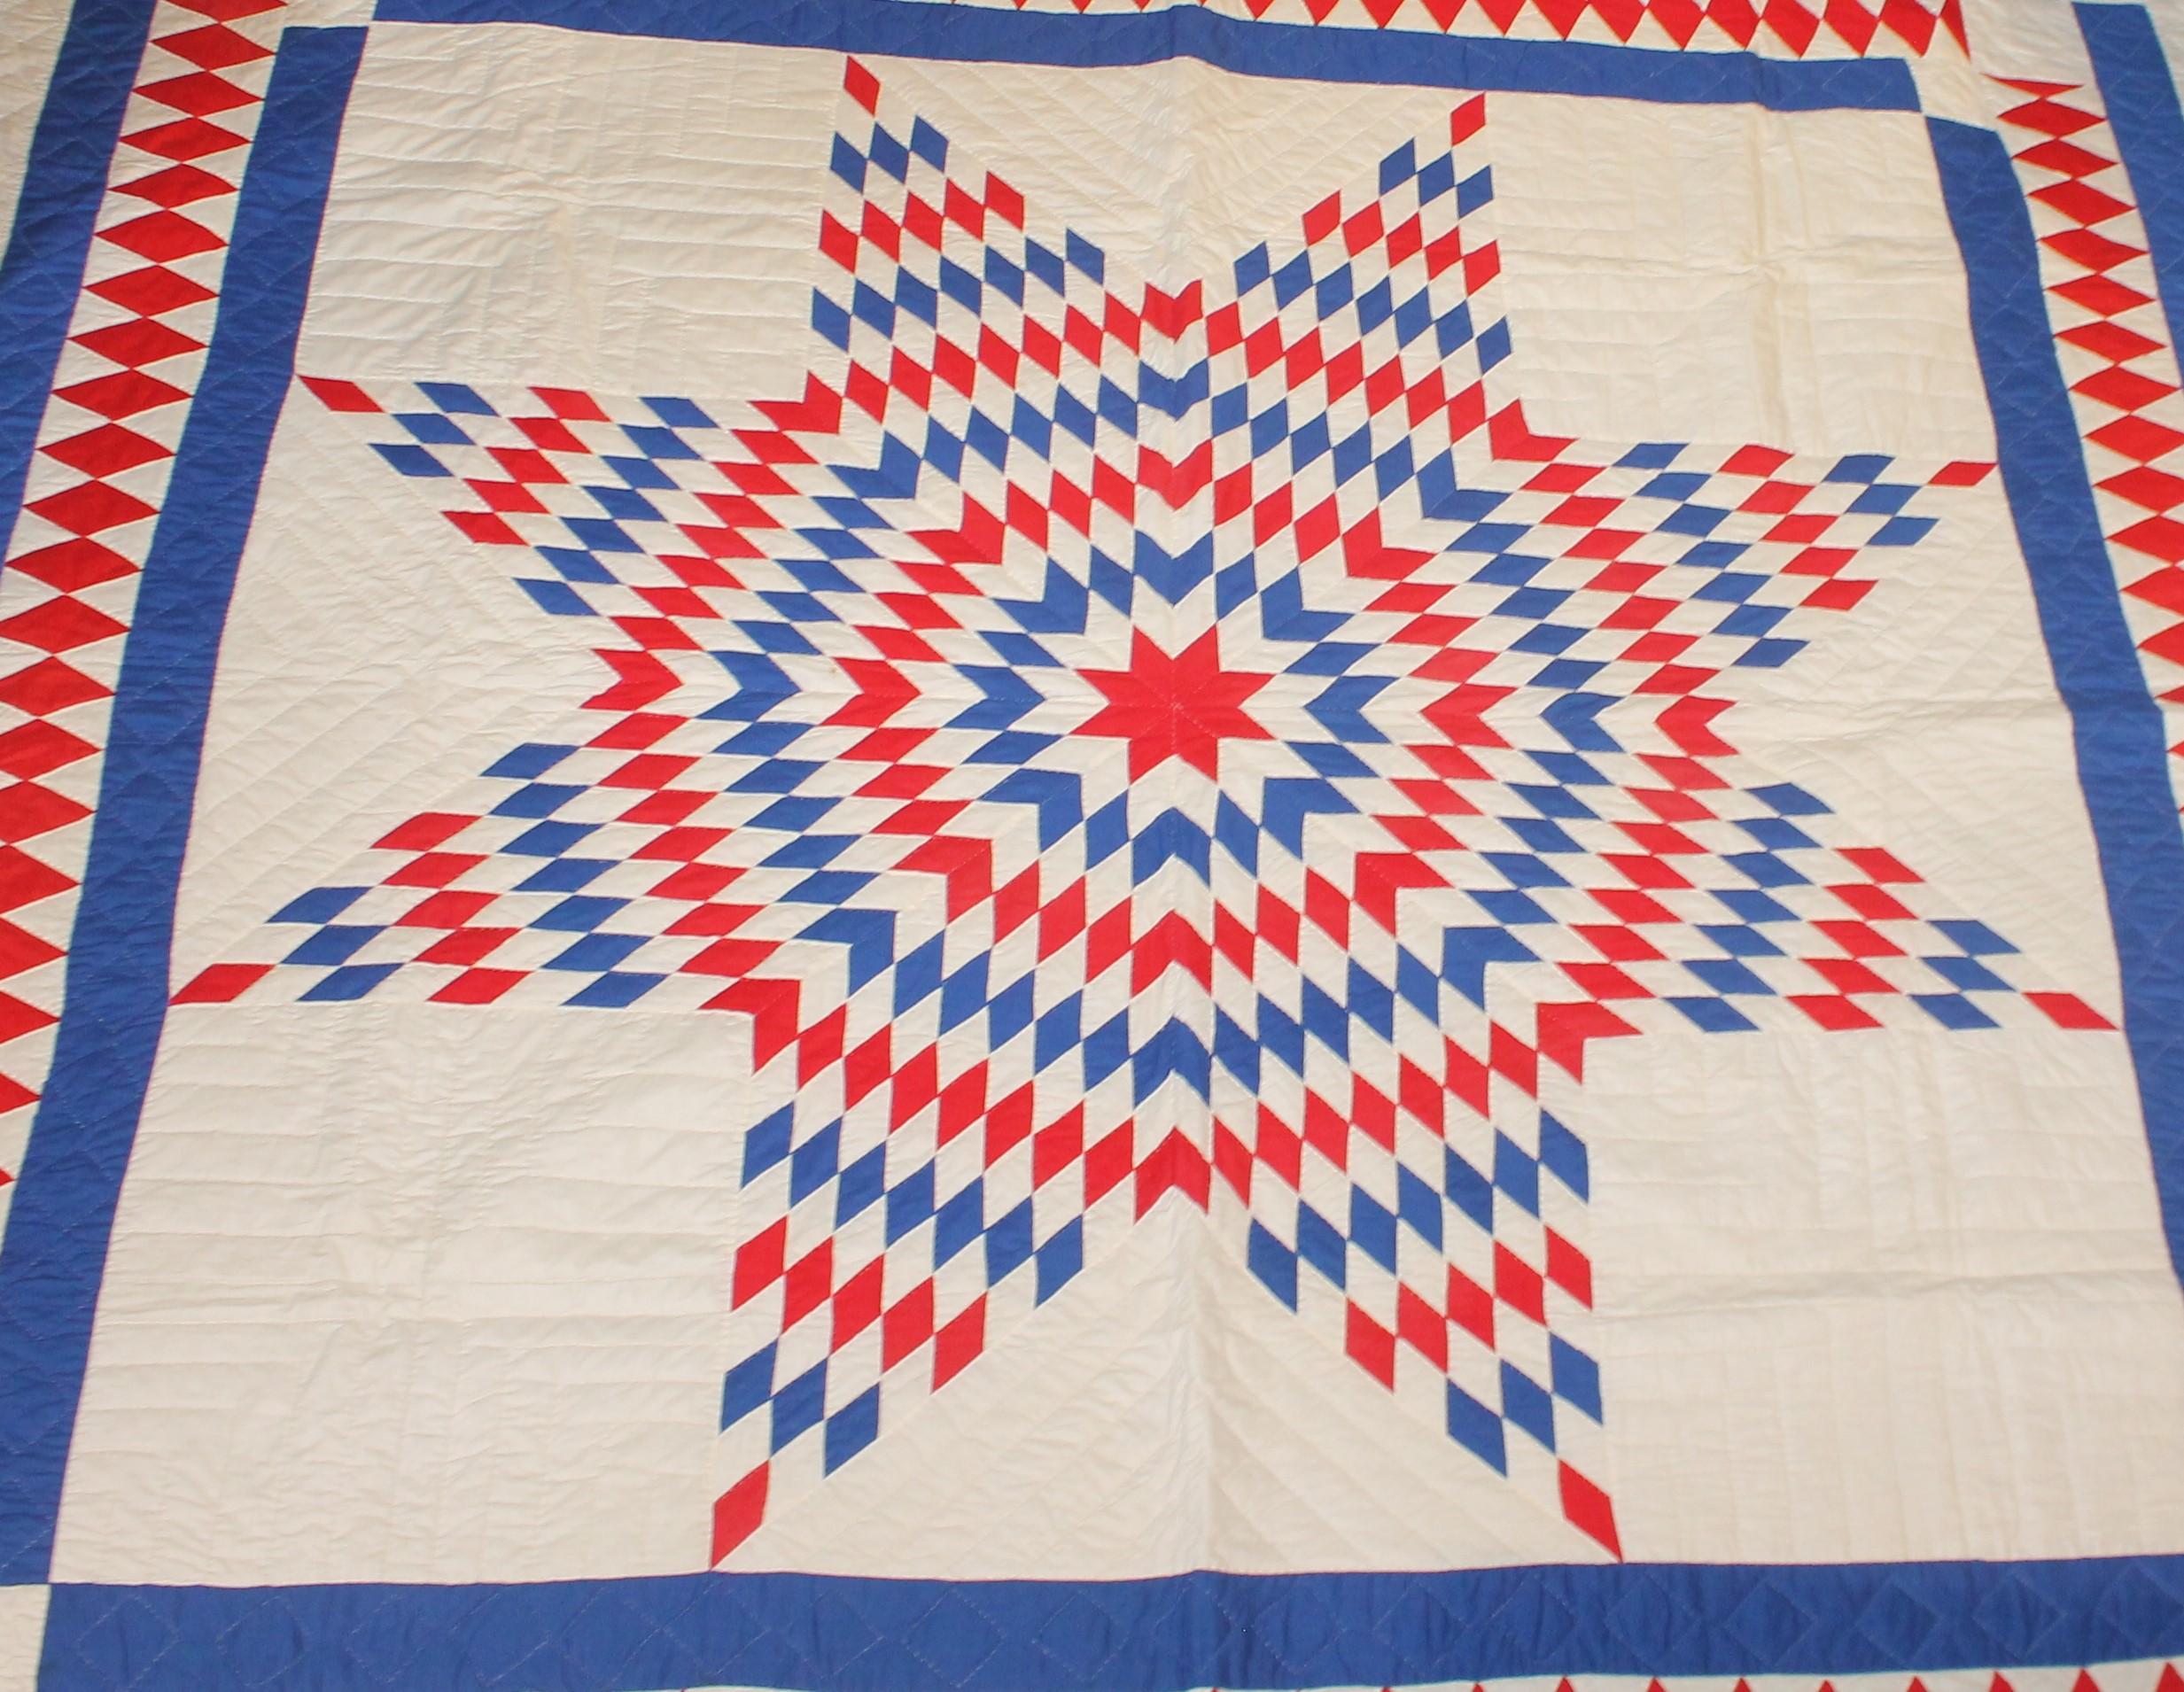 This fantastic red, white and blue star quilt from Pennsylvania has a wonderful diamond border. The piecework is very good and fine quilting. The condition is mint.